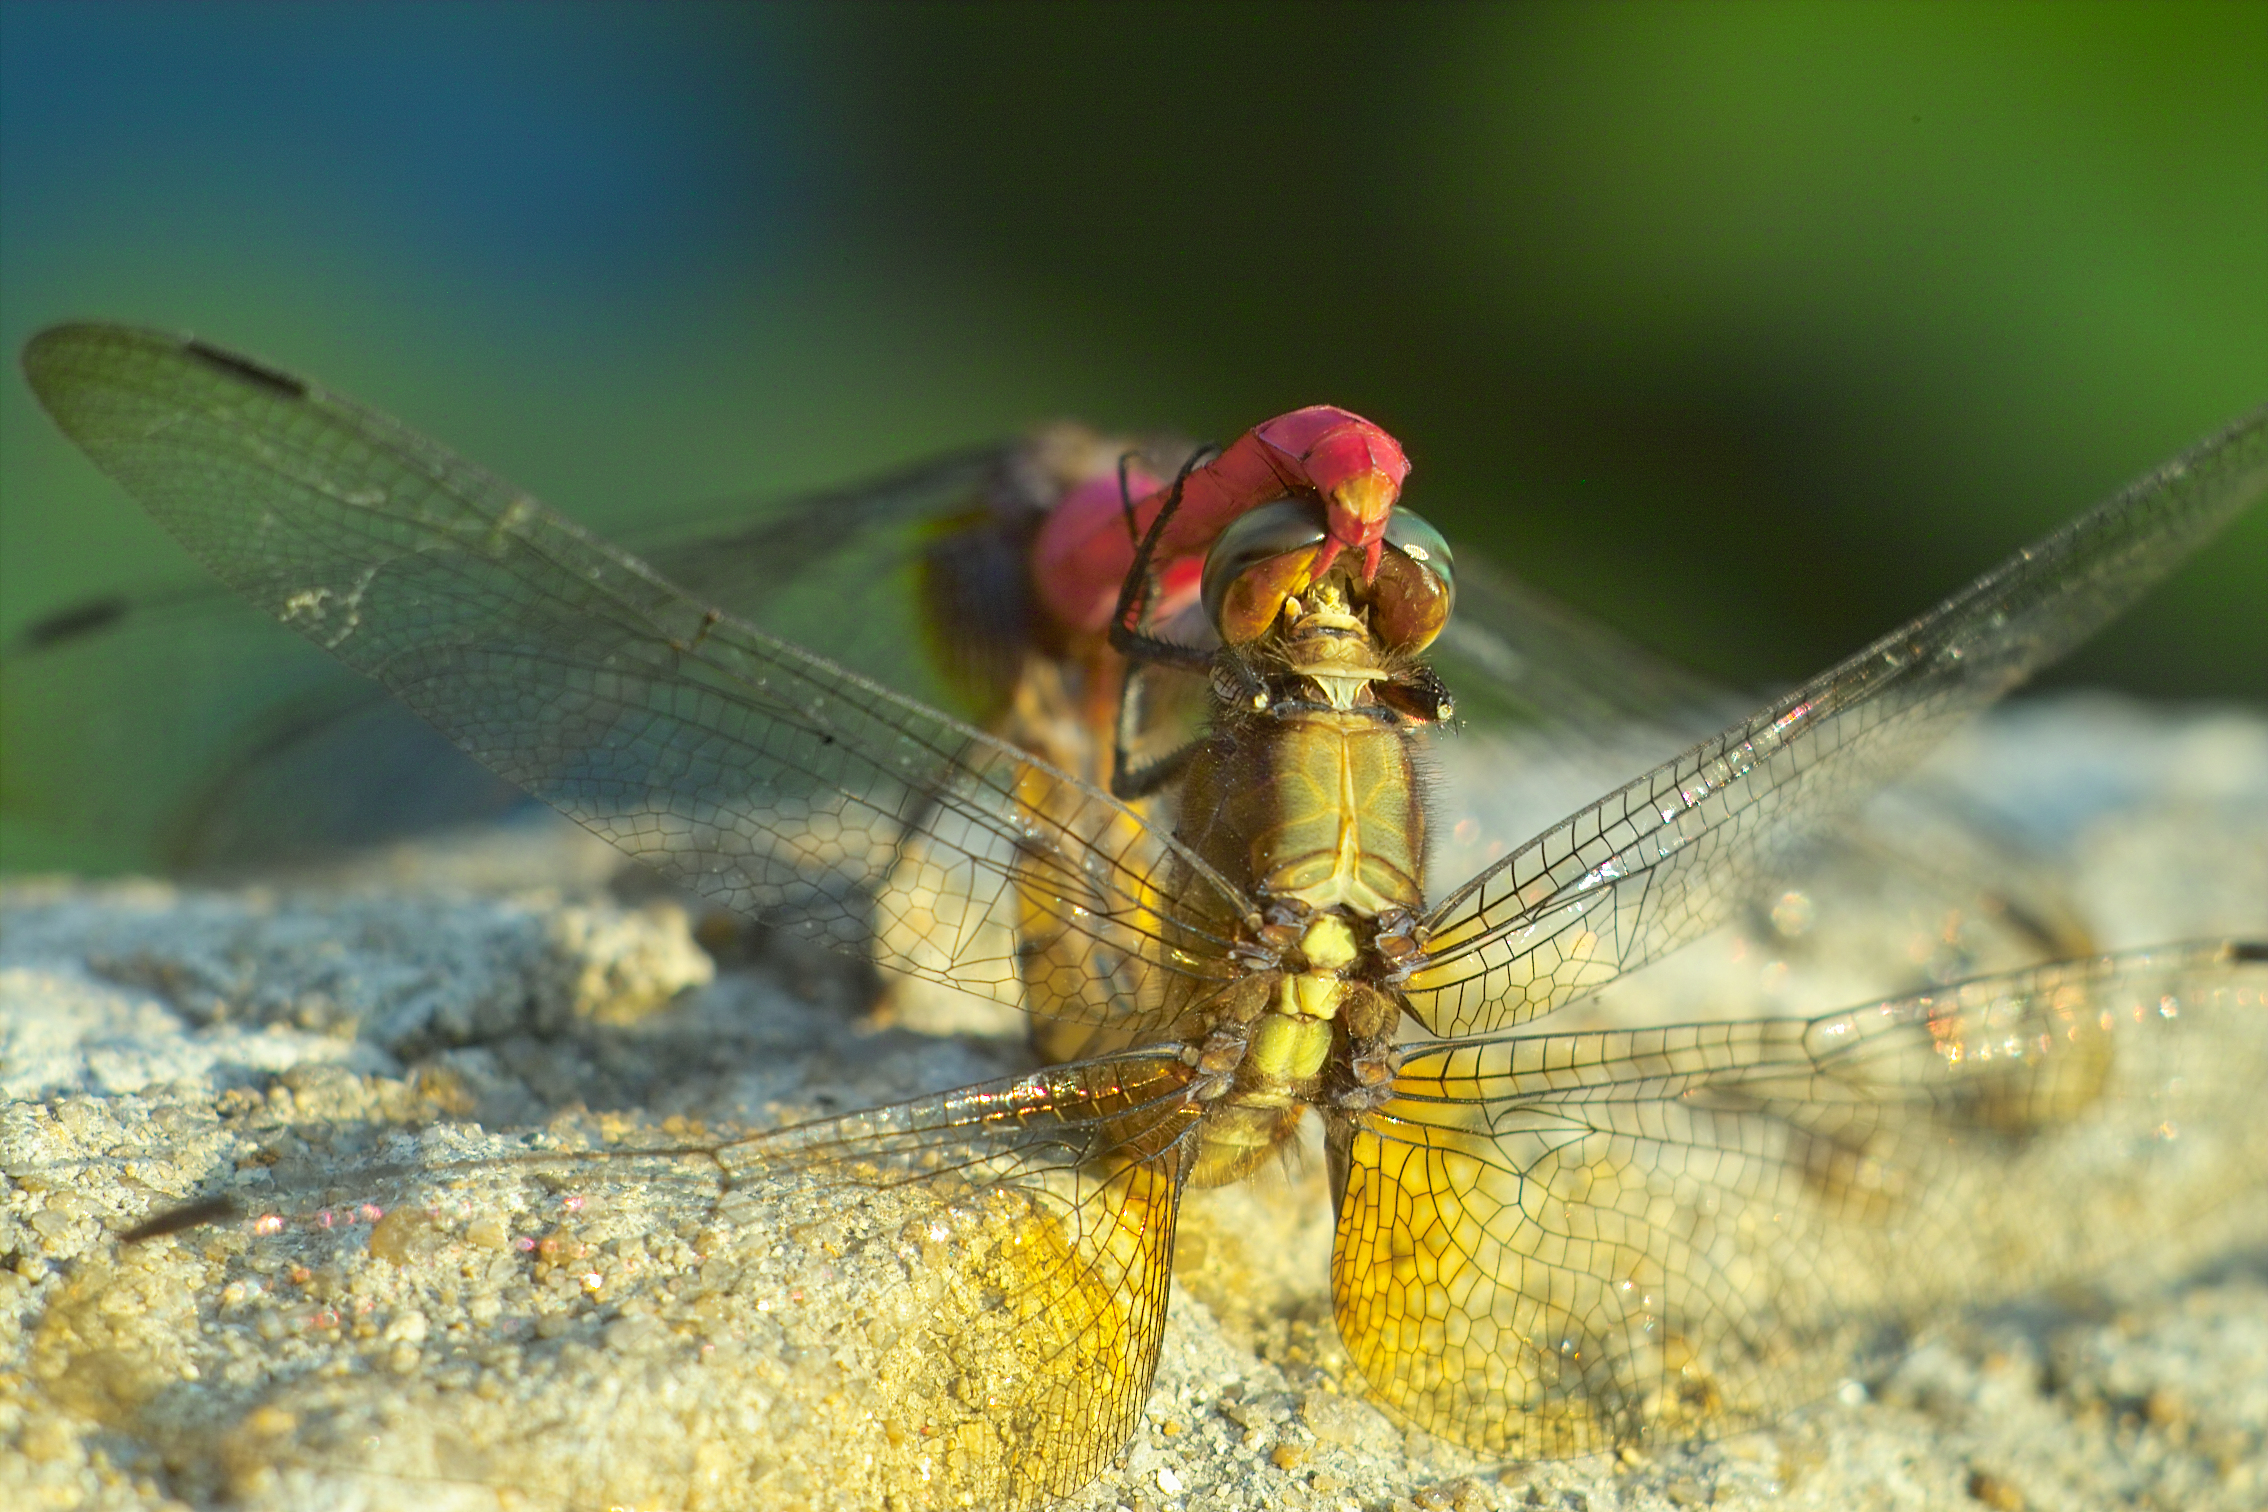 Mating Dragonflies